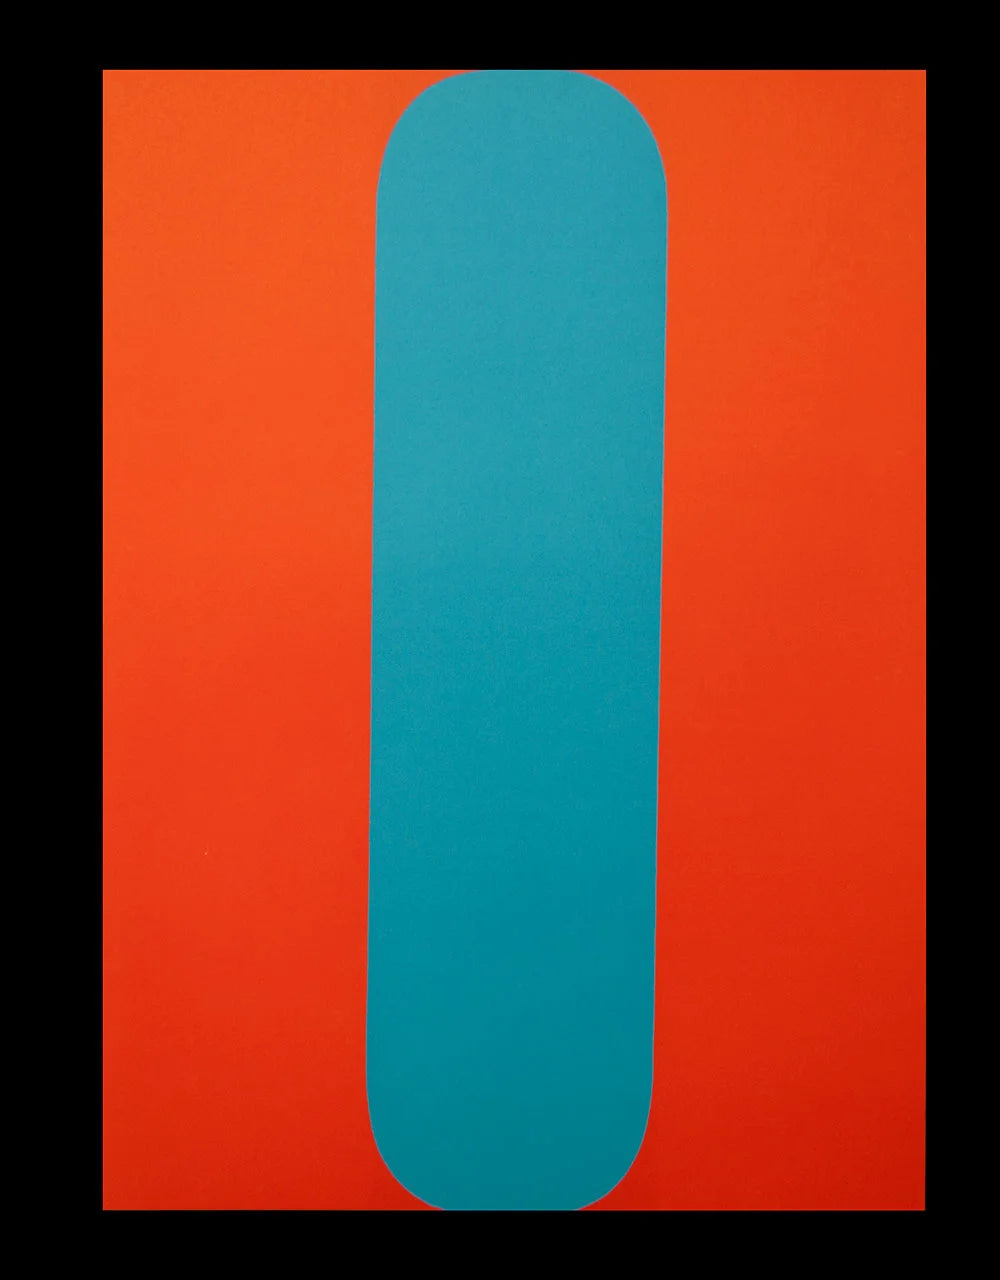 Ellsworth KELLY Lithograph Original 1964 Red/Blue Limited Edition